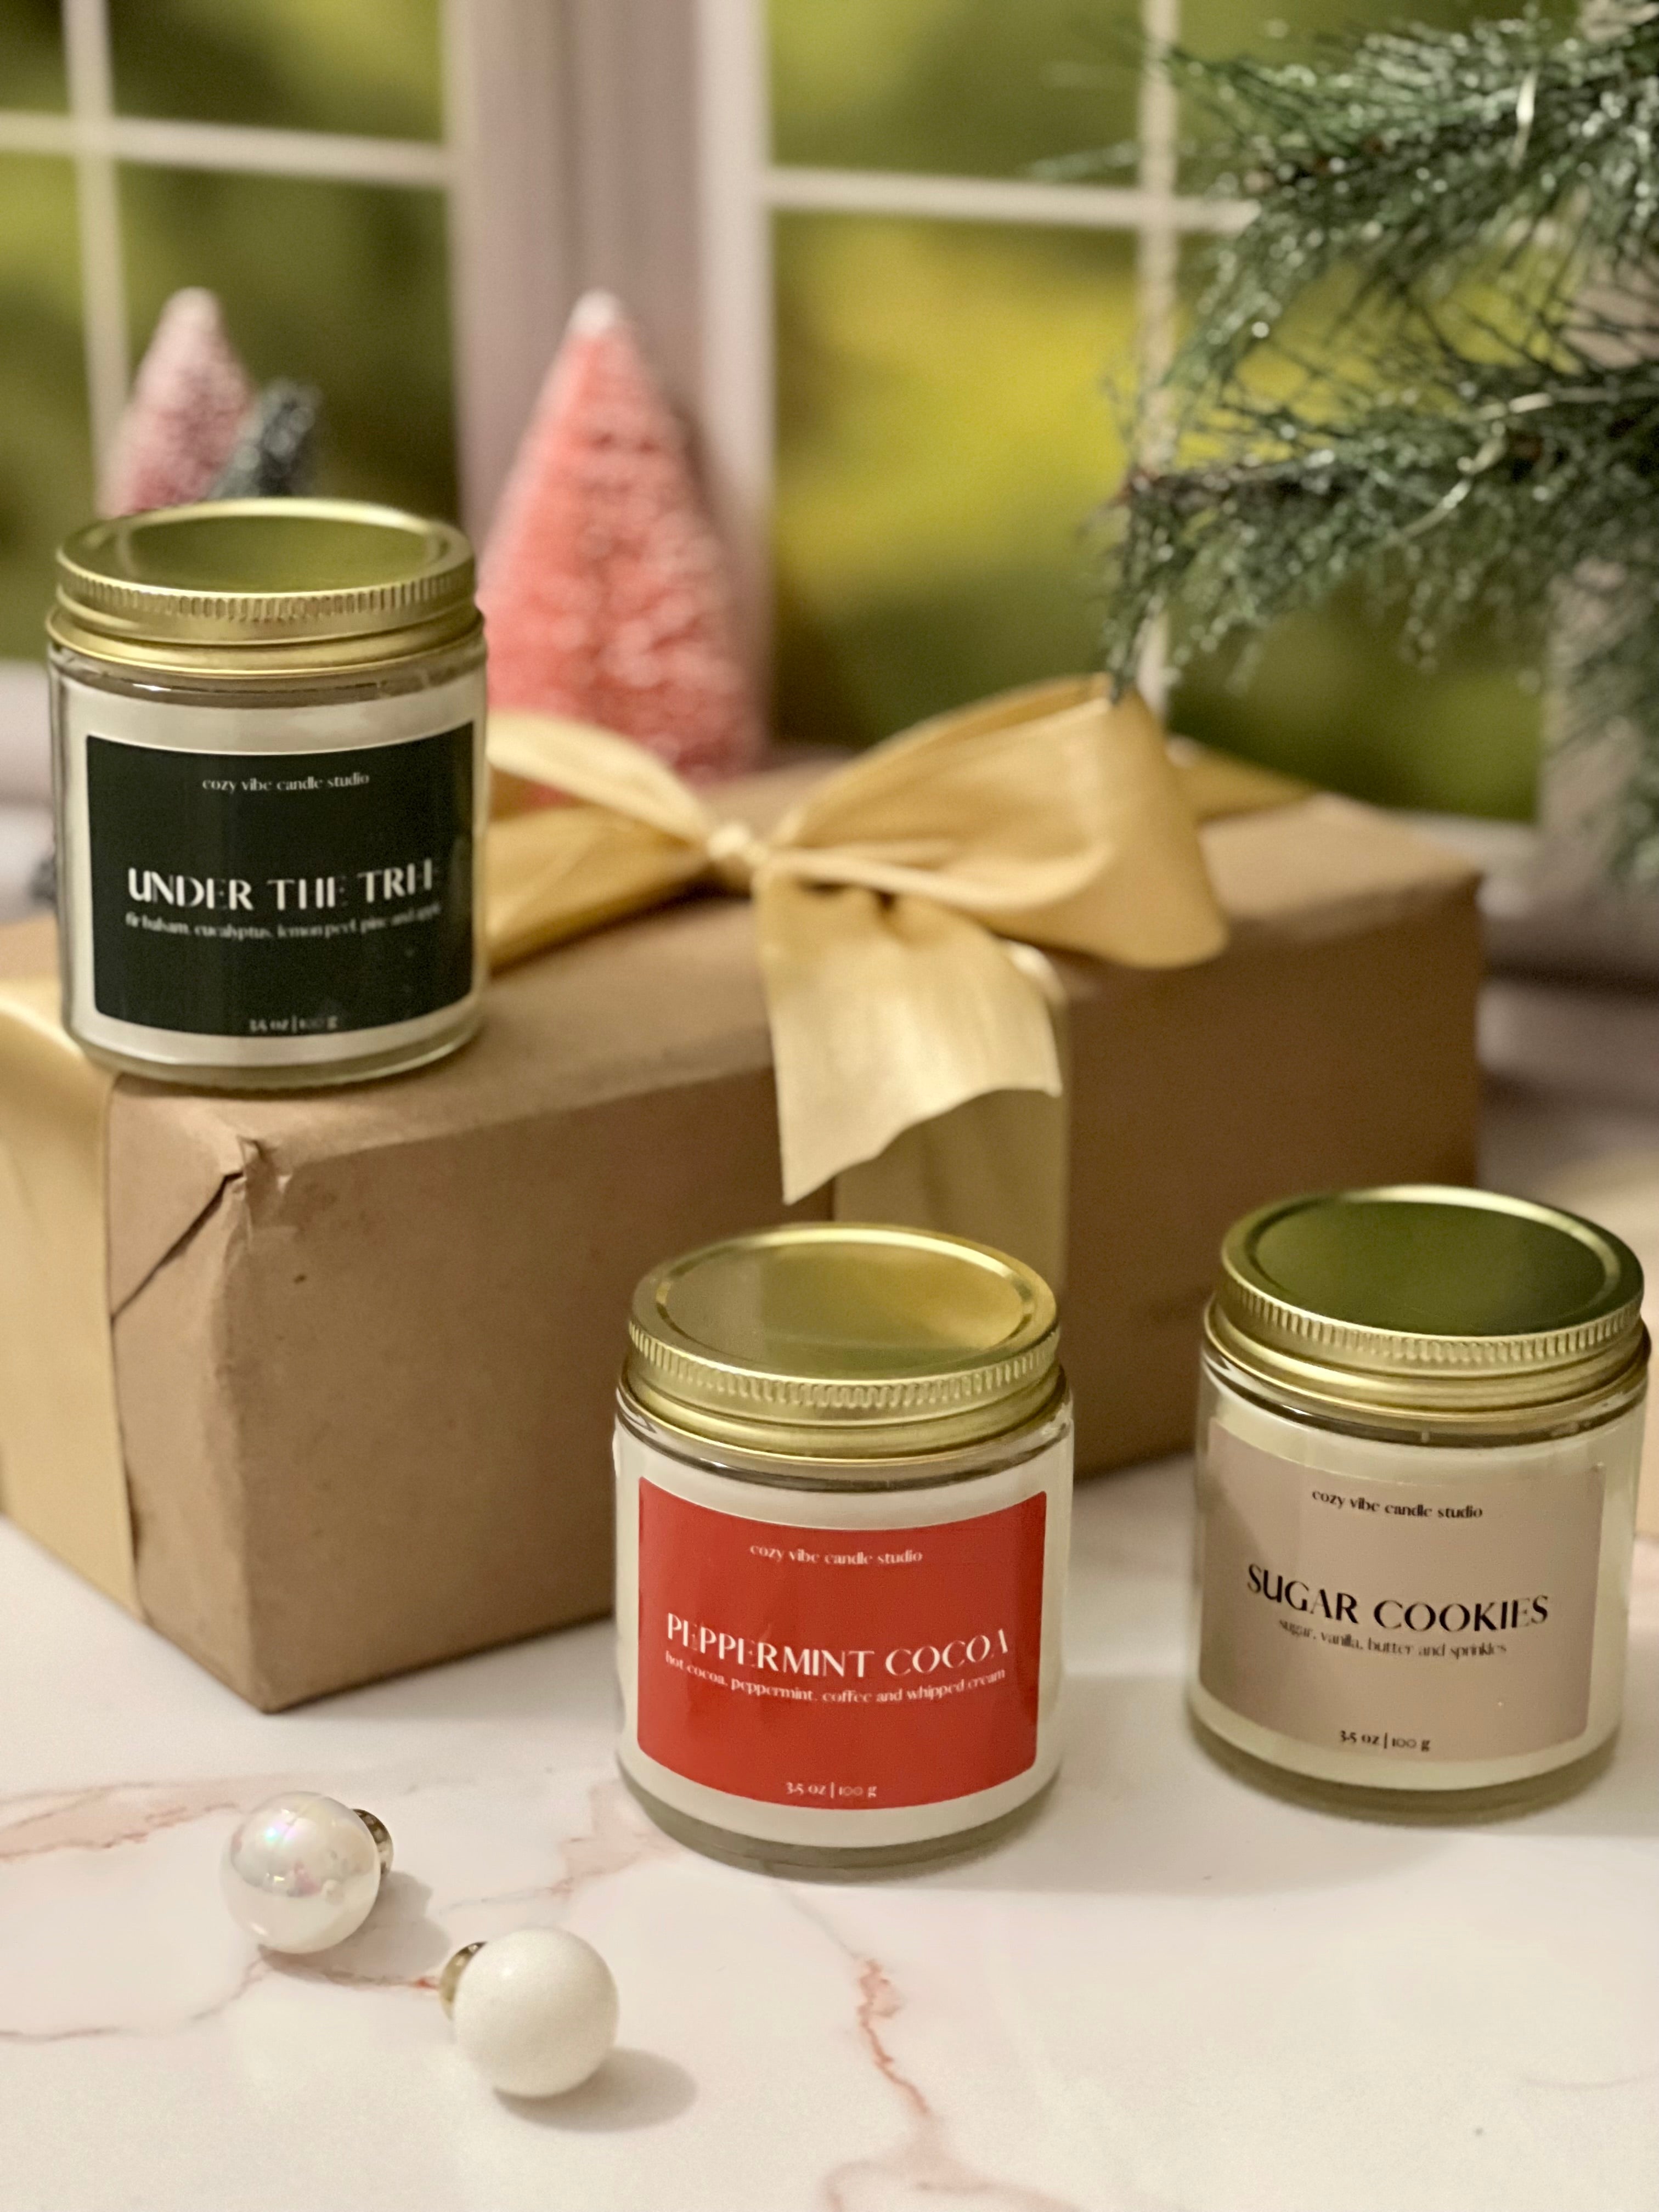 IT'S GIVING COZY HOME VIBES - 14oz – Adoré Candles